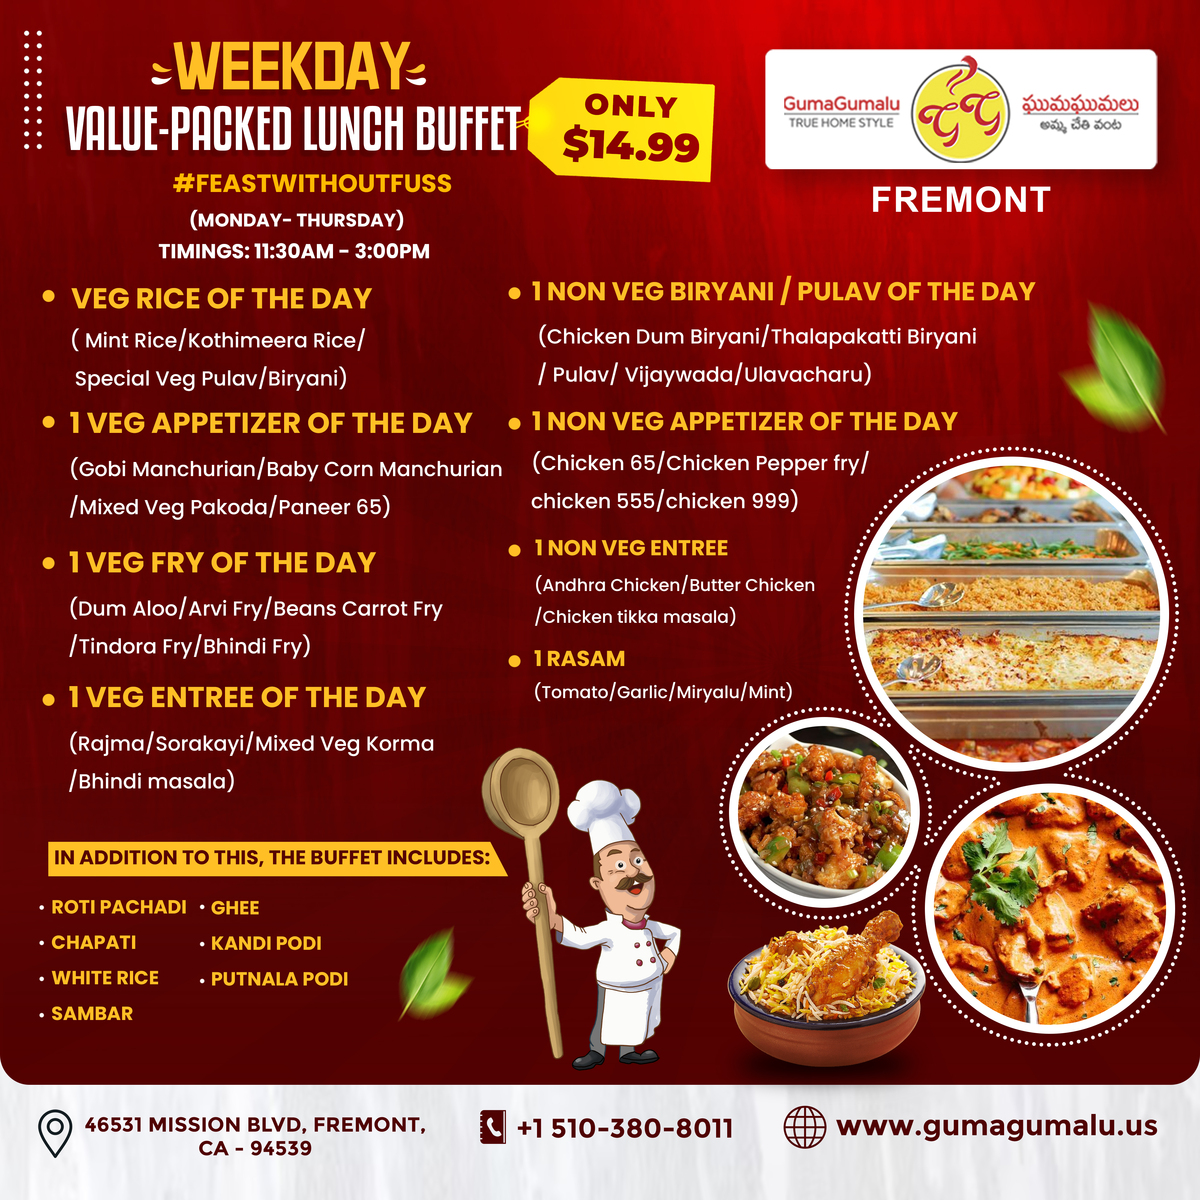 Weekday Value-Packed Lunch Buffet 